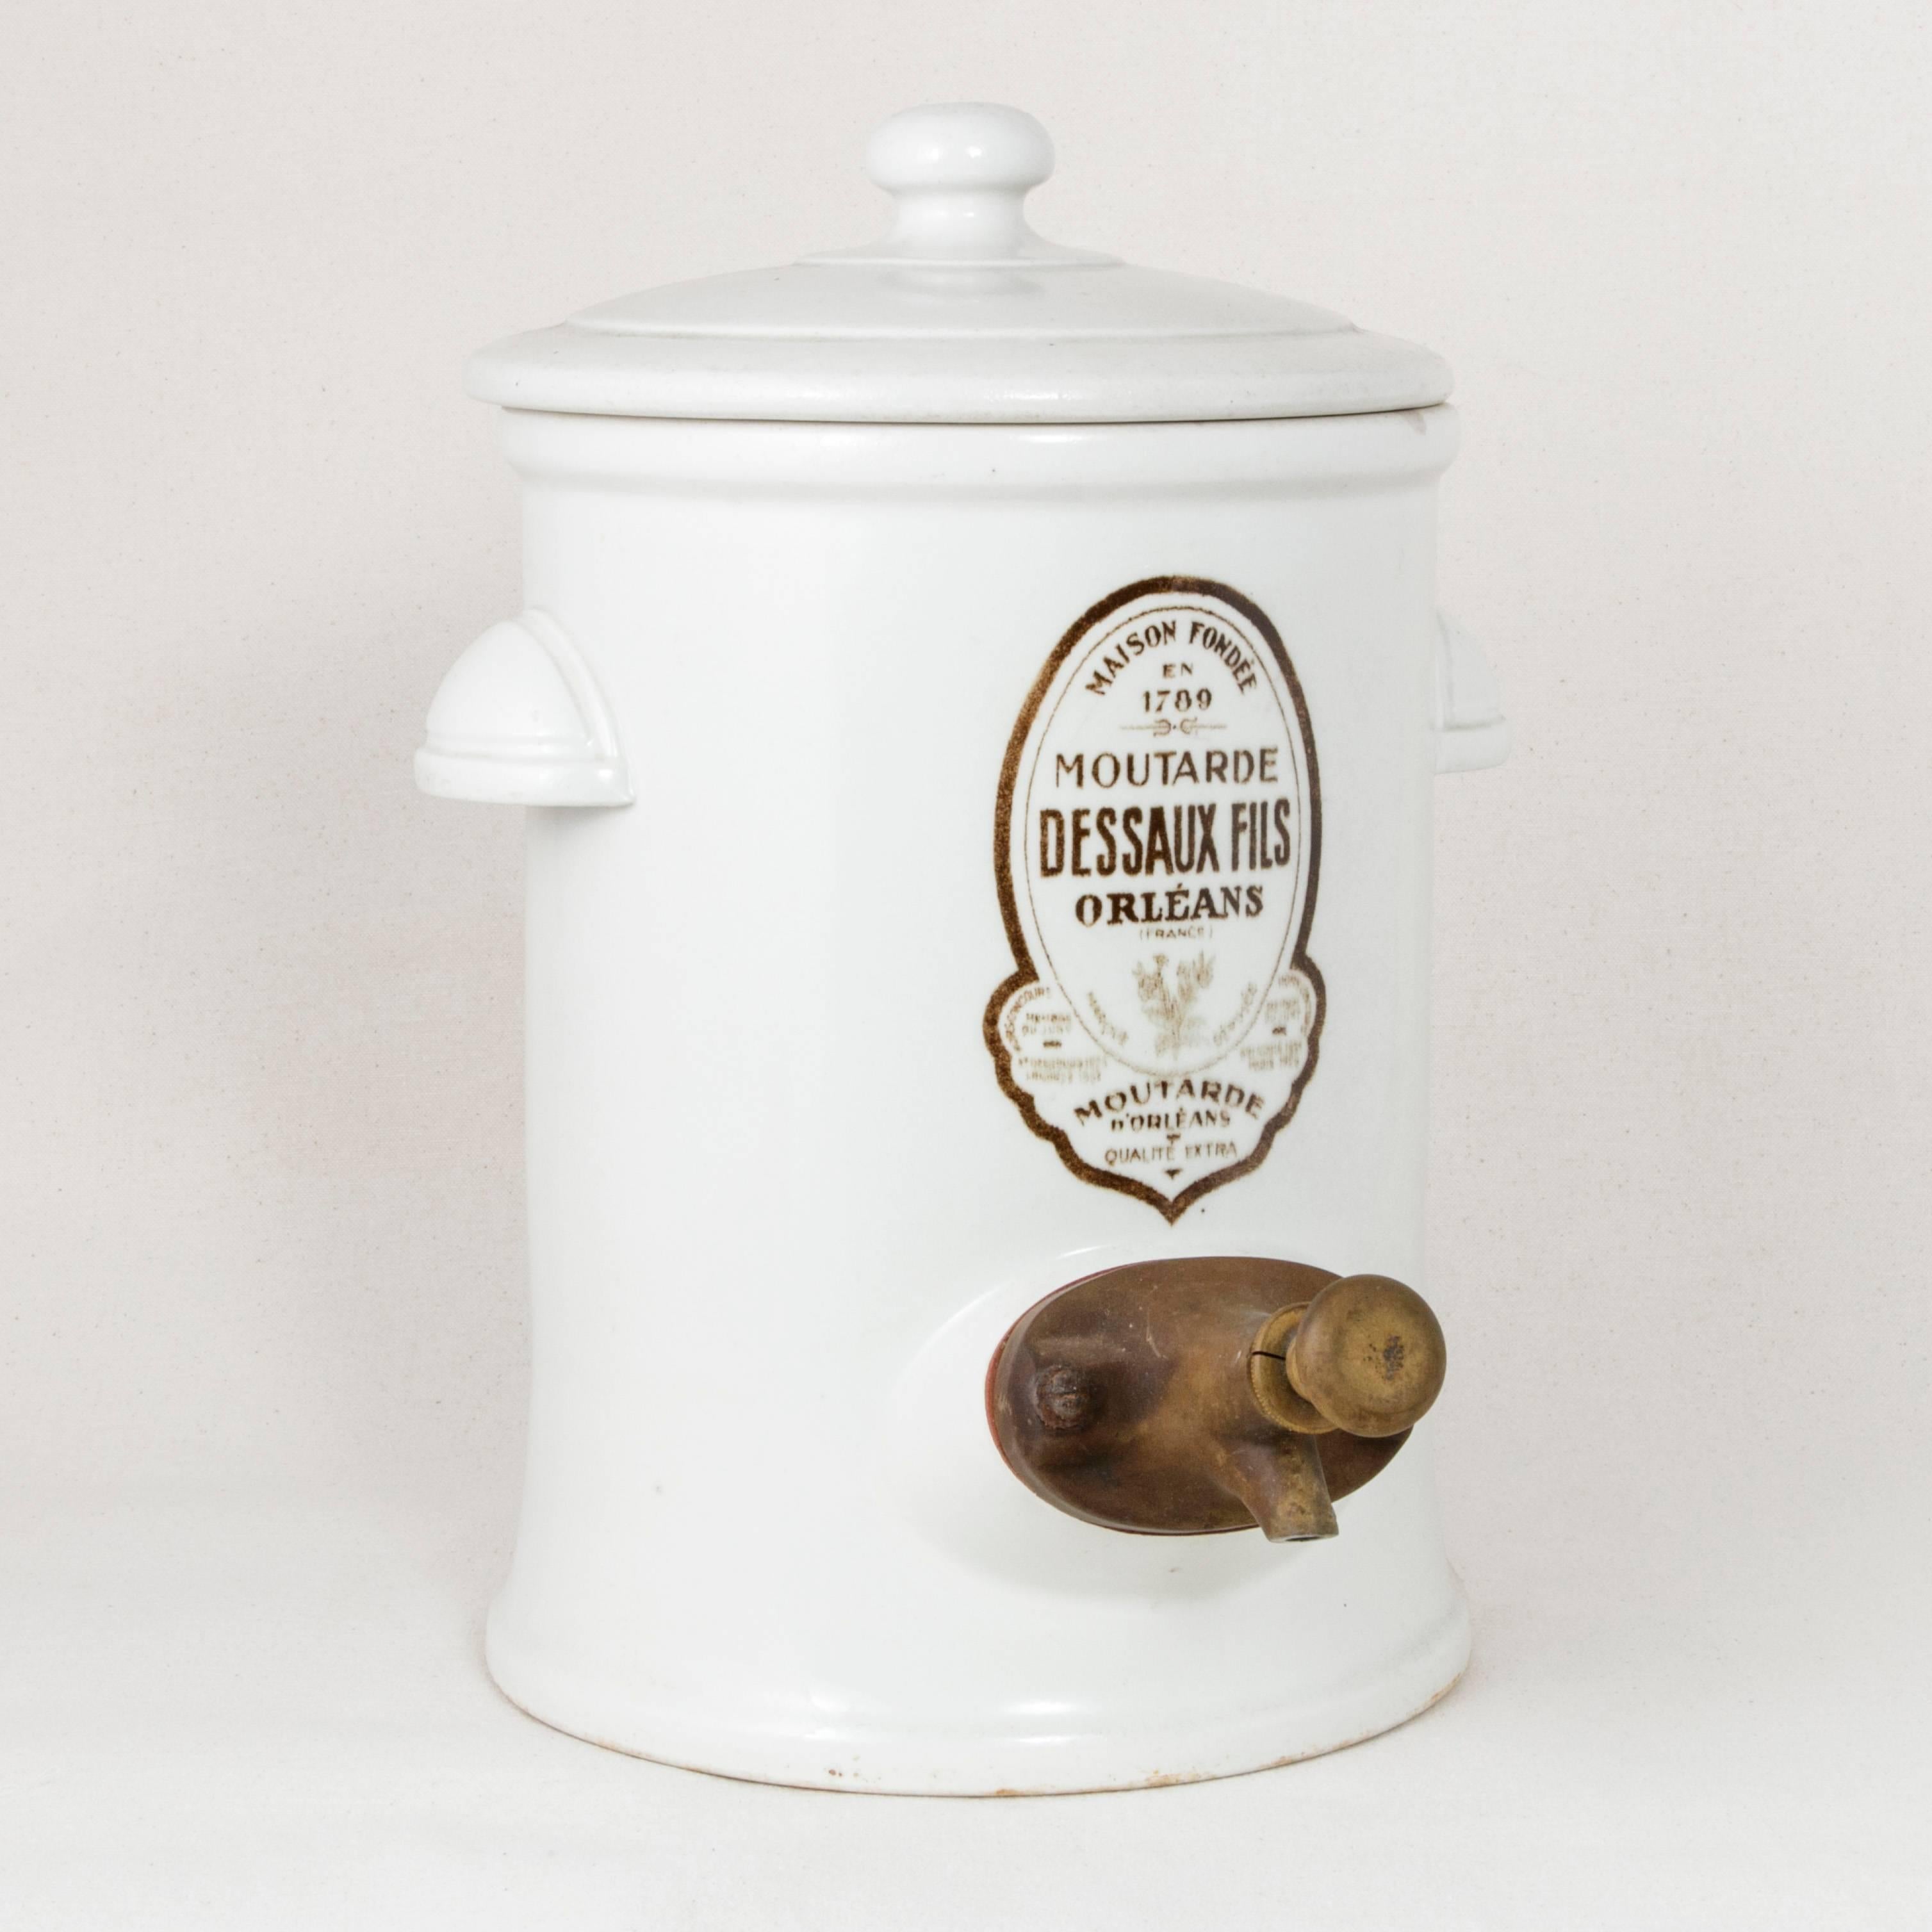 This very large early 20th century white faience mustard pot or dispenser with its lift-off lid features the label of the mustard and vinegar maker, Dessaux Fils, Orleans, founded in 1789. The back is marked as well with the name of the maker.